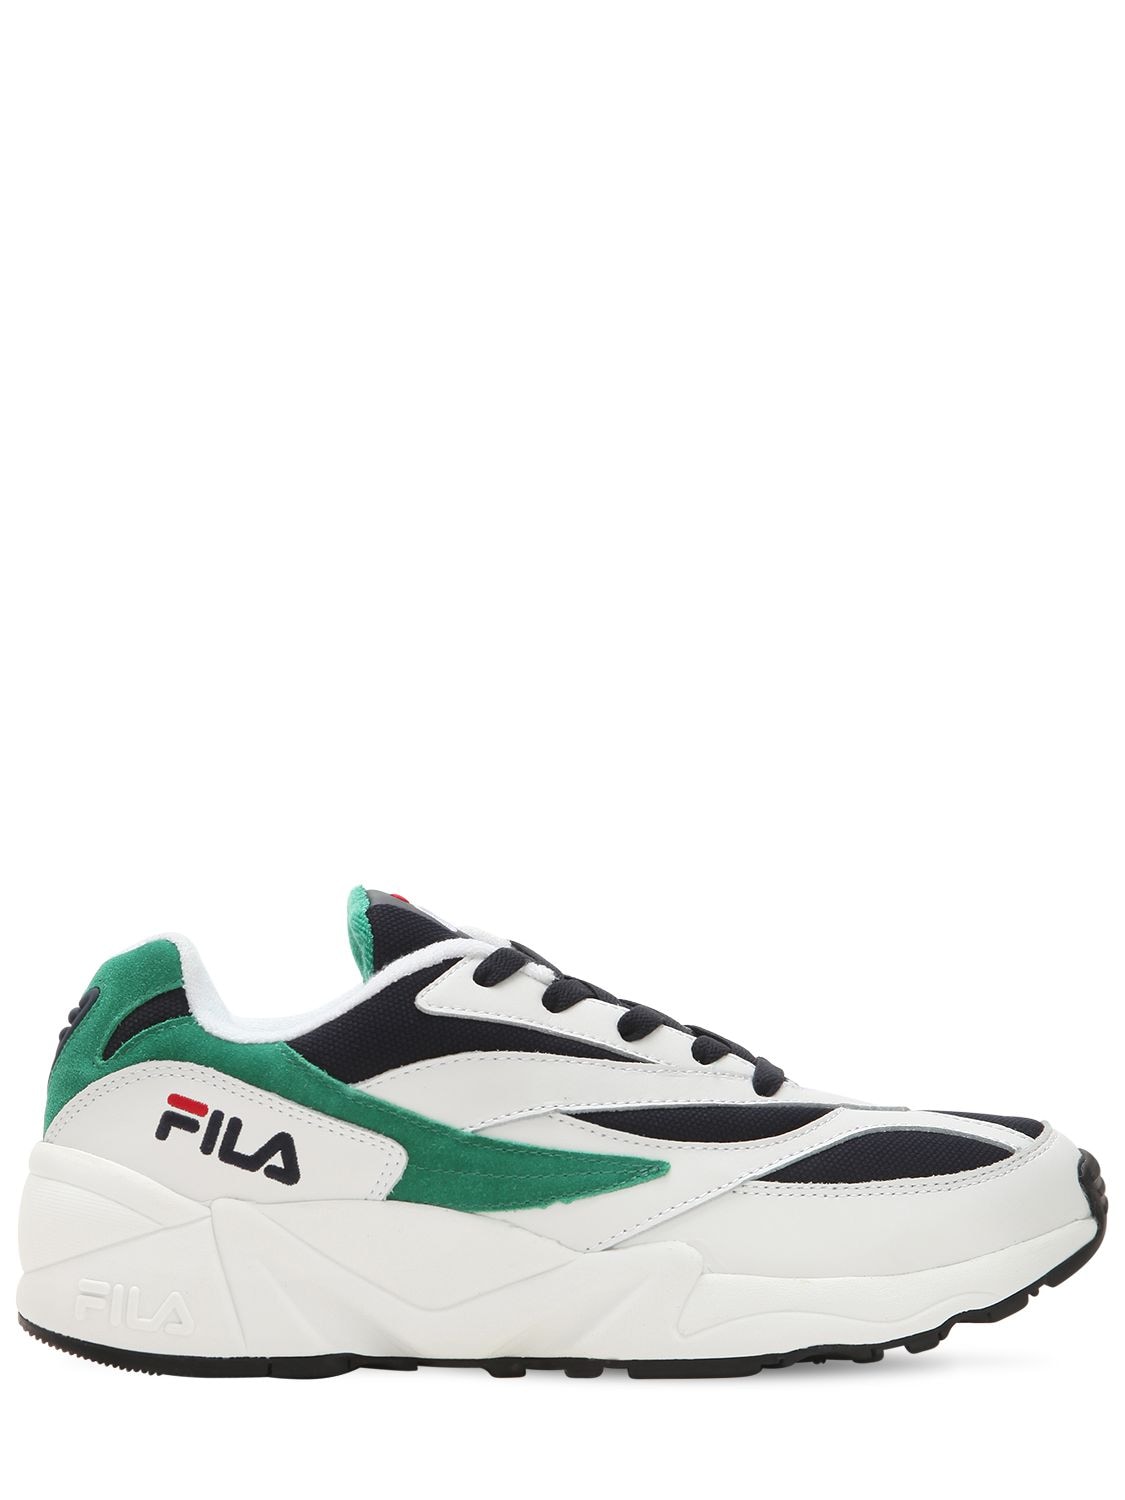 Fila Venom Leather, And Canvas Sneakers In White/green | ModeSens